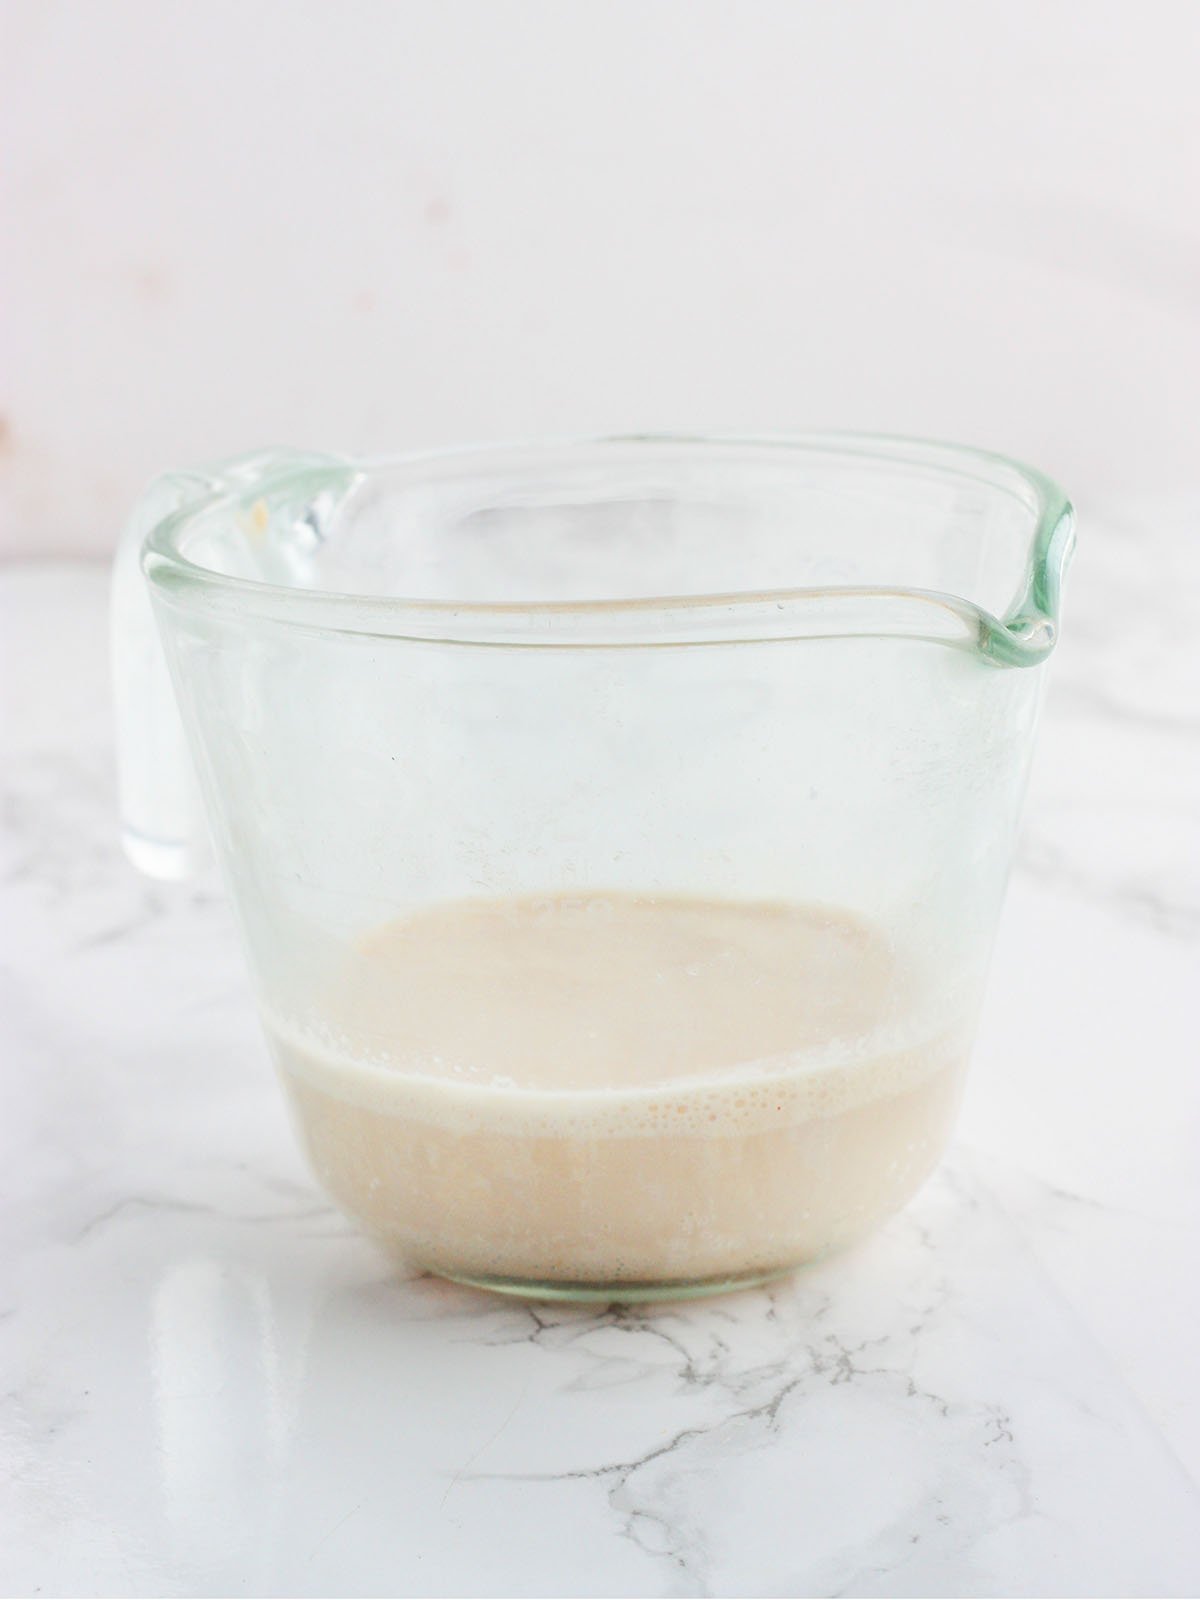 activated yeast with foam on top in a glass measuring cup